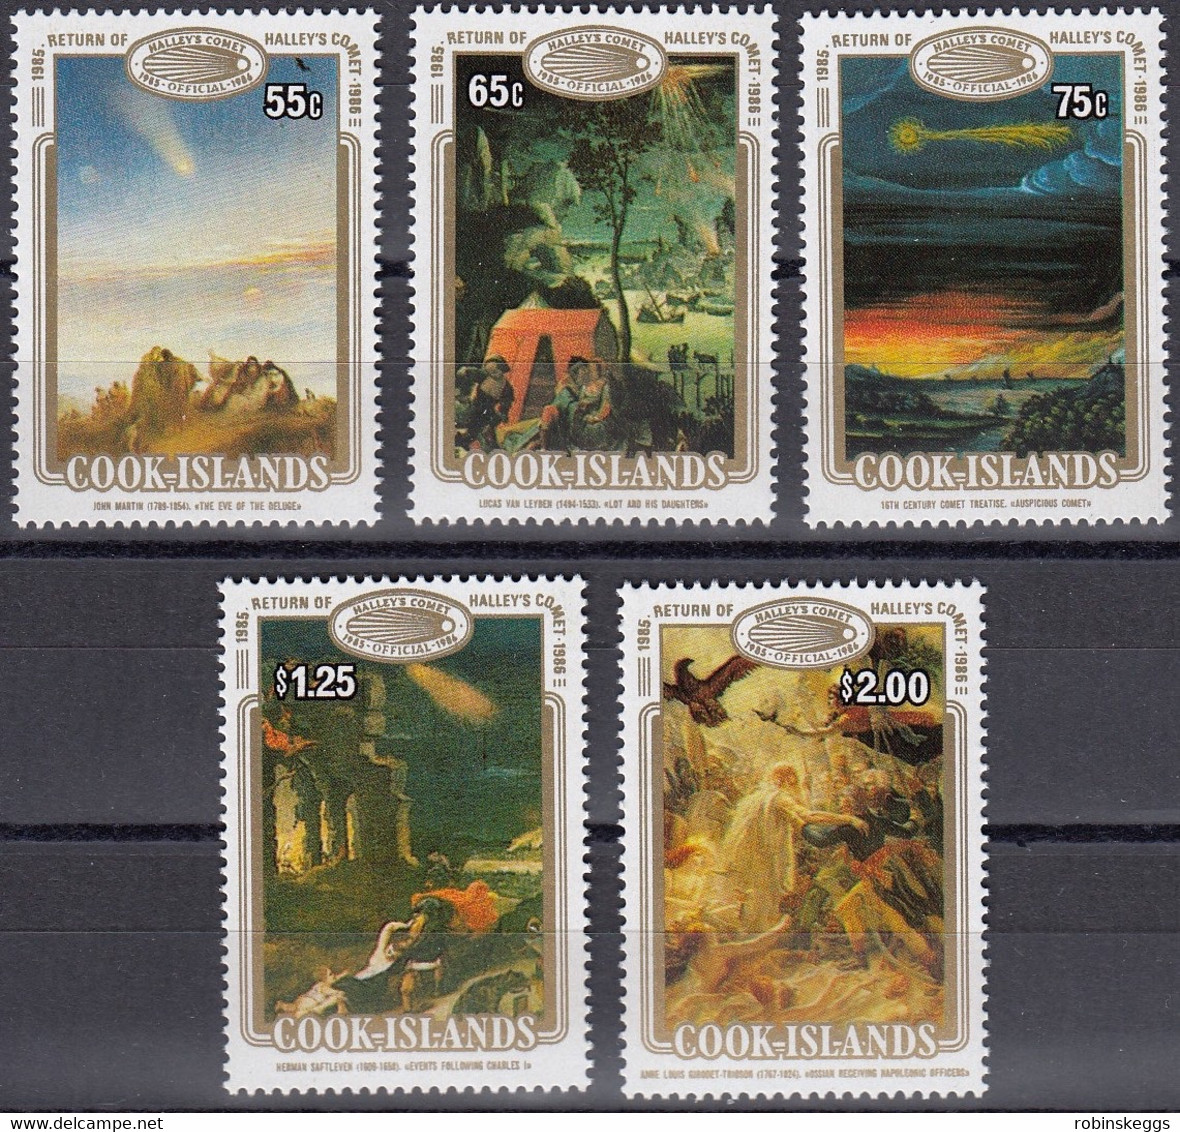 COOK ISLANDS 1986 Appearance Of Halley's Comet, Set Of 5 MNH - Oceania